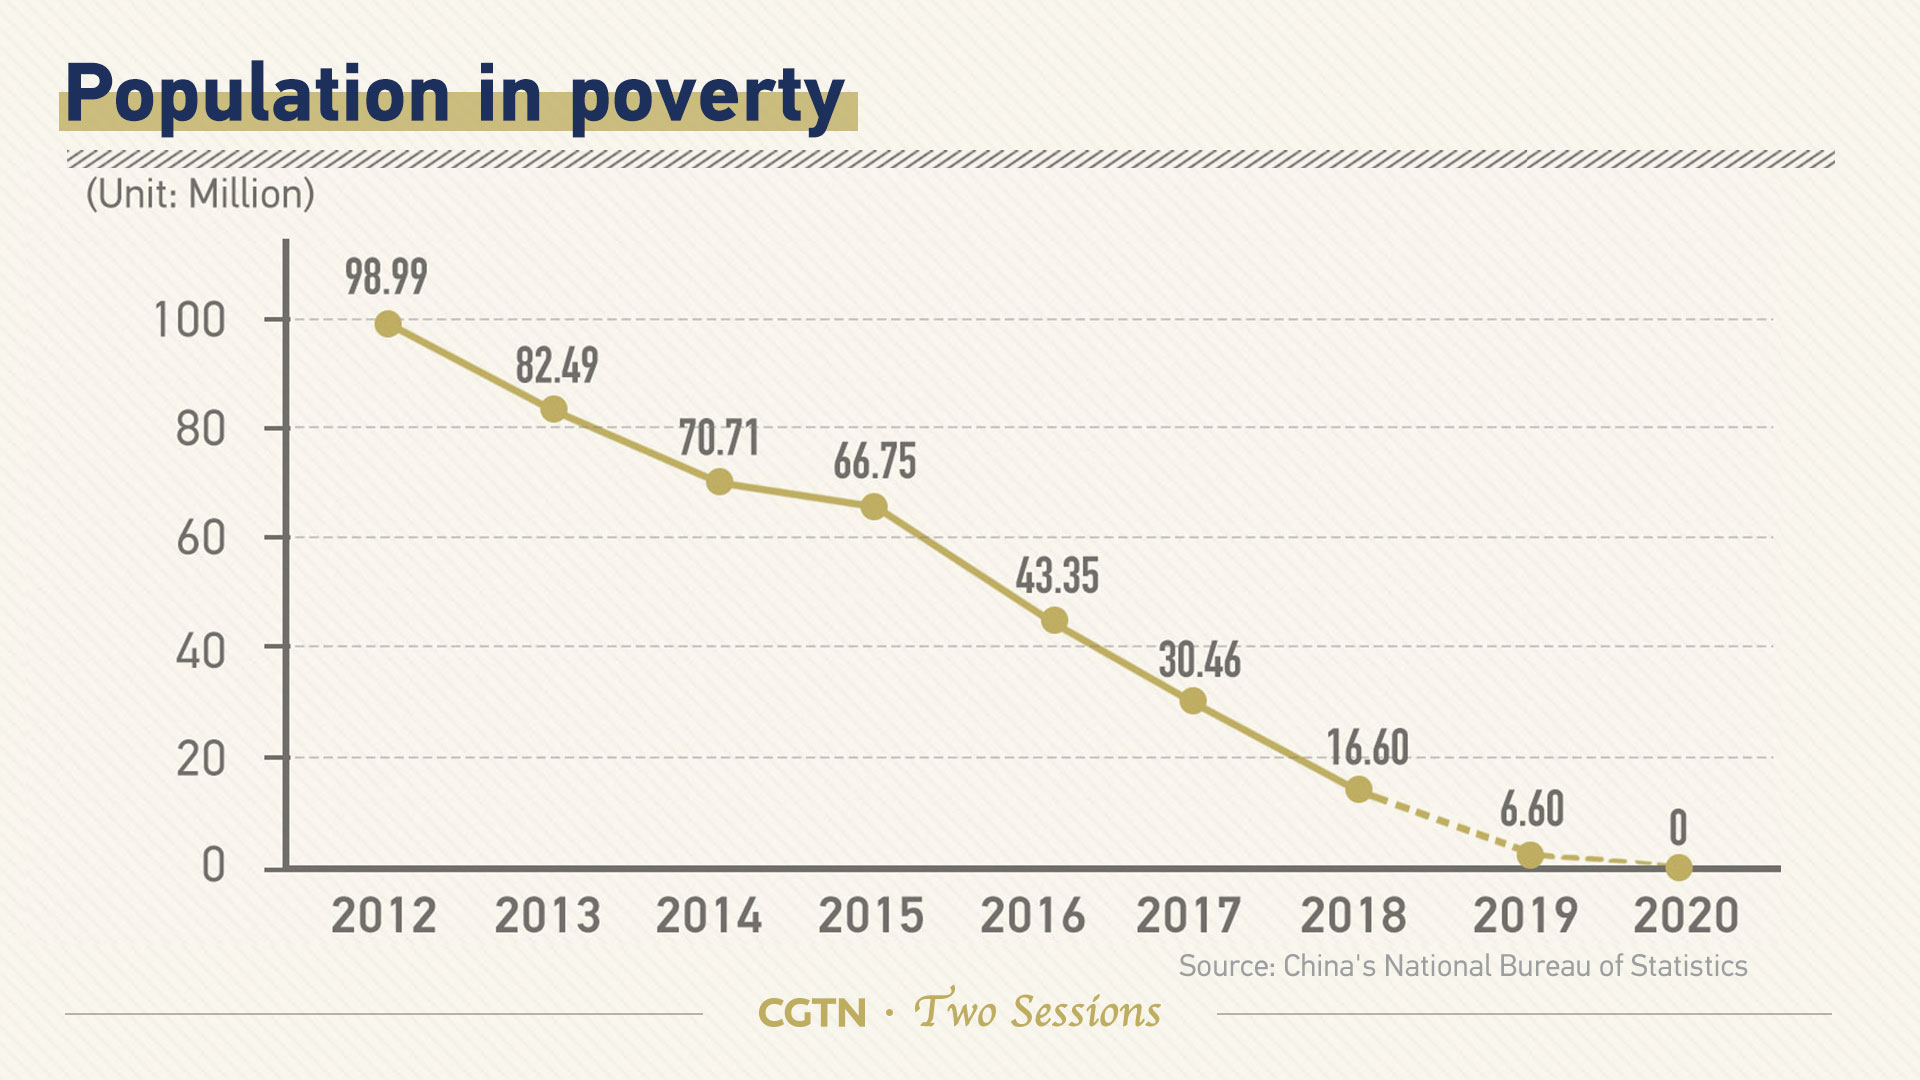 Will China be able to eliminate poverty by 2020? CGTN